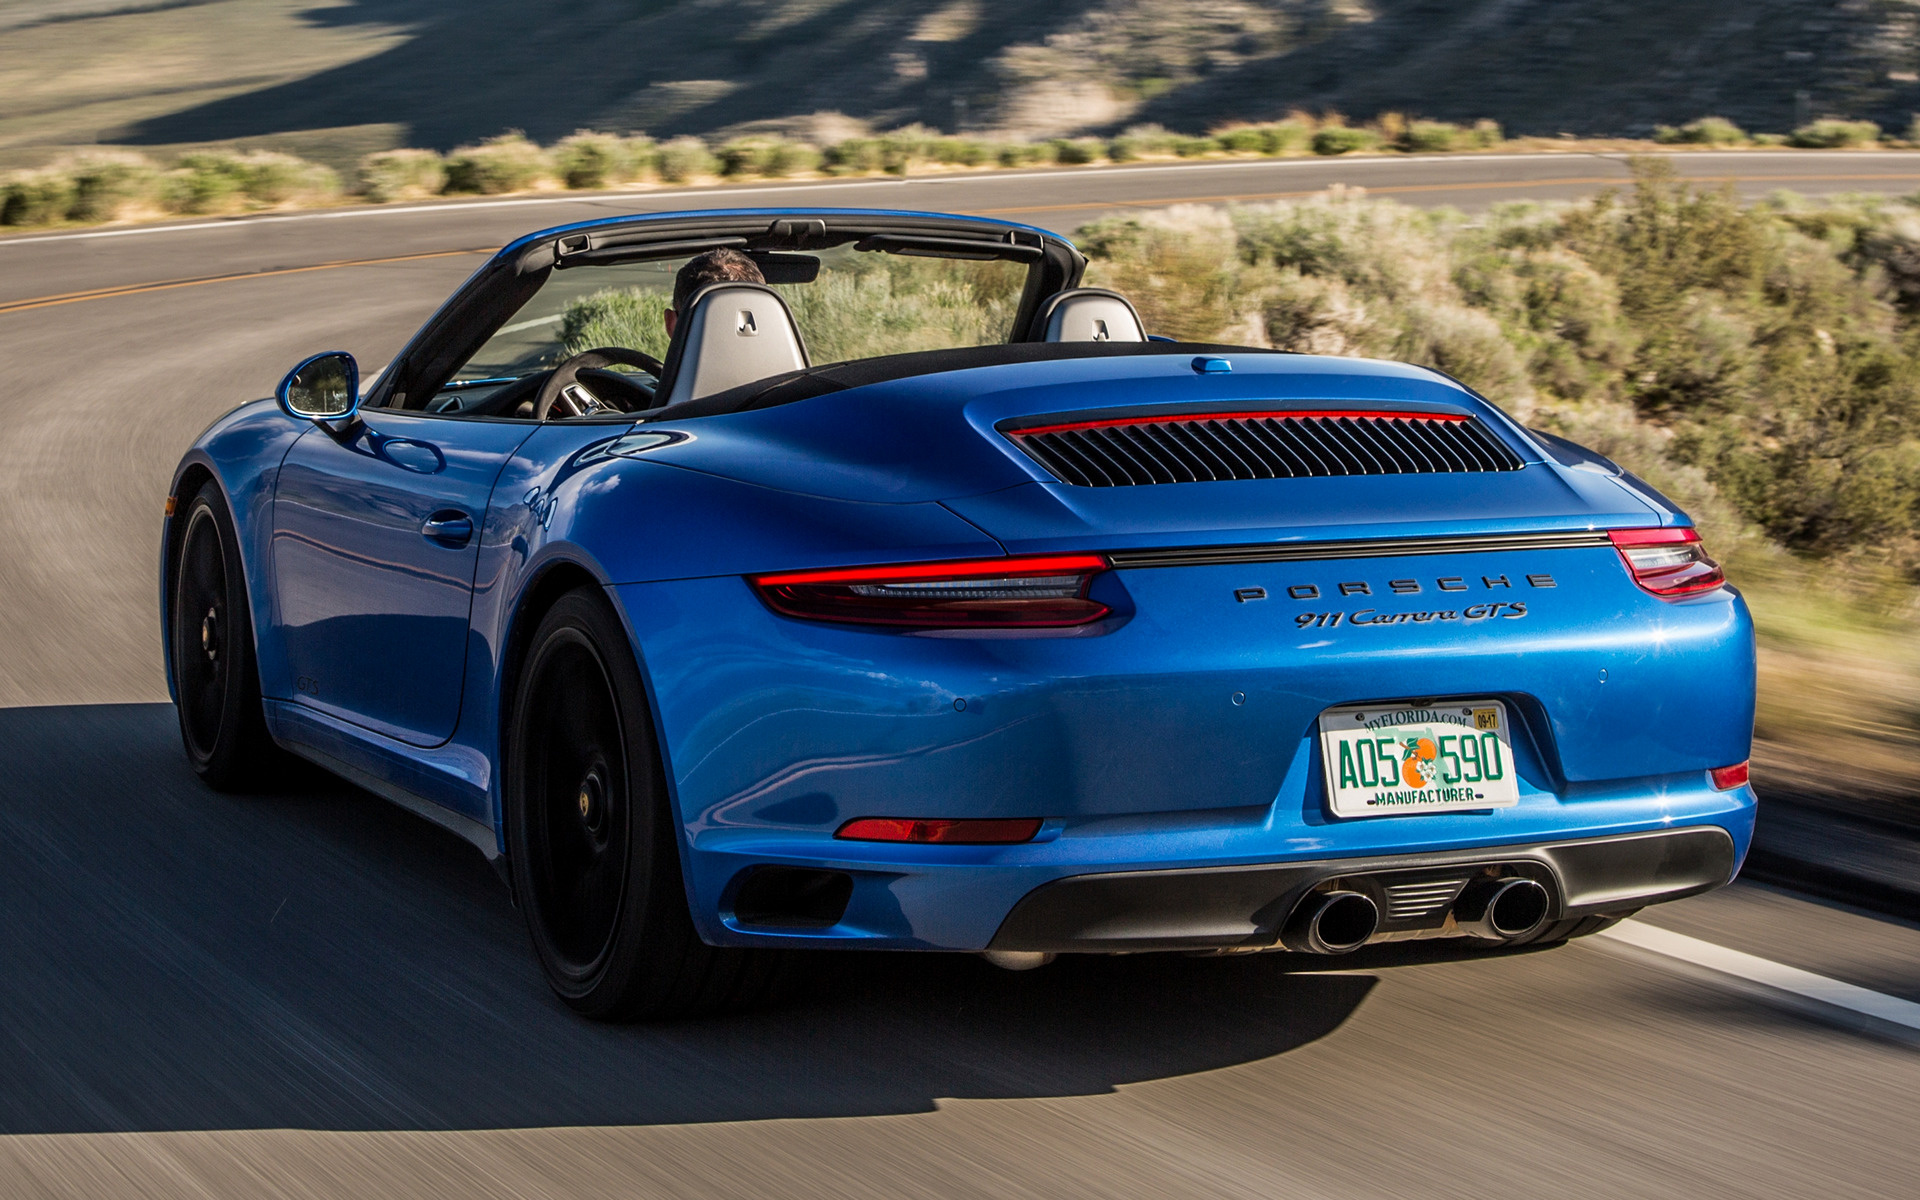 2018 Porsche 911 Carrera GTS Cabriolet US   Wallpapers and HD